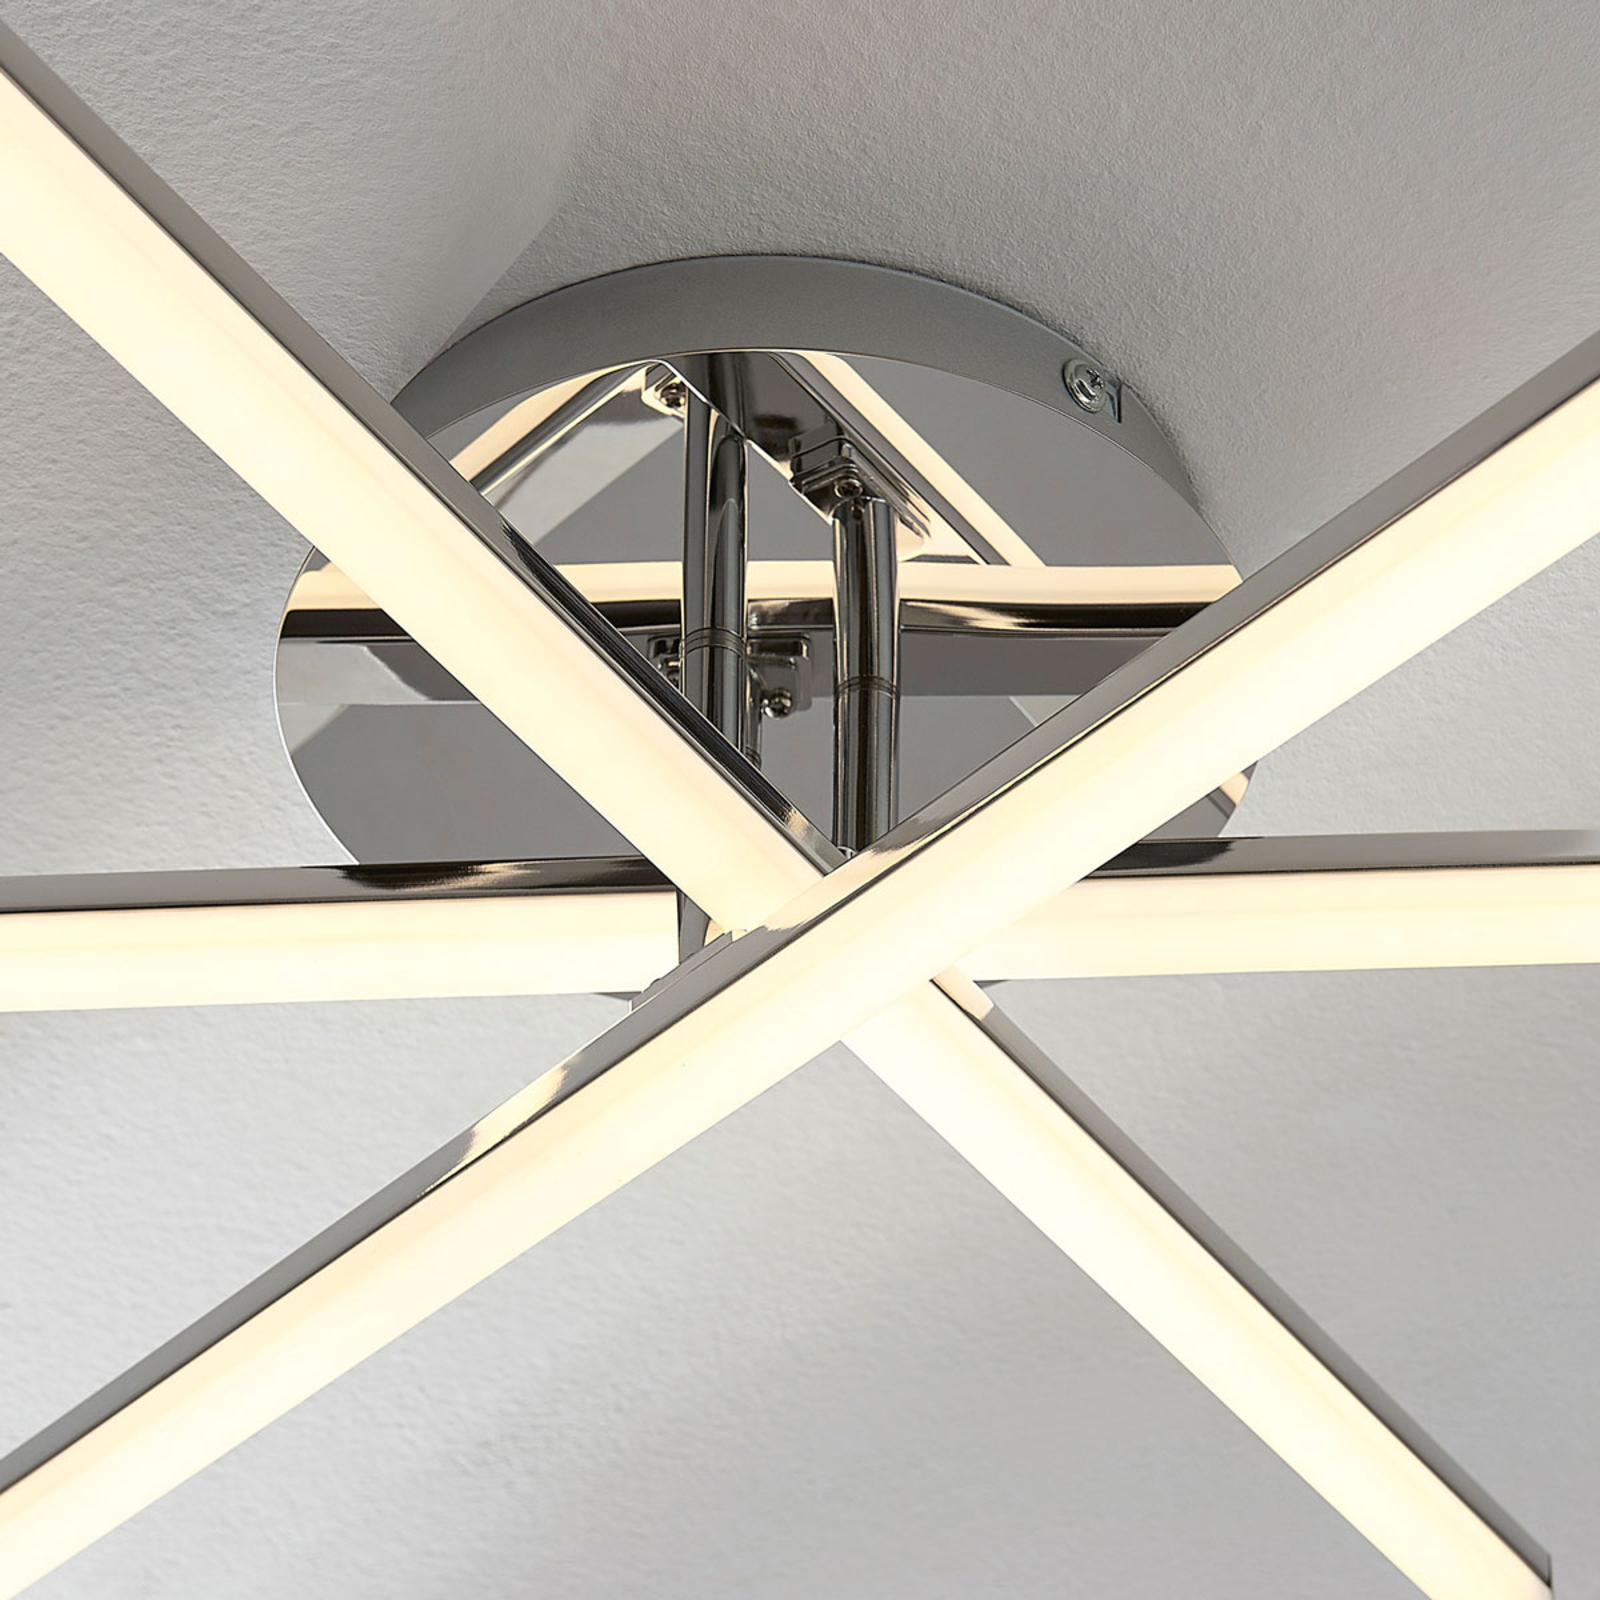 Korona LED ceiling lamp, dimmable in four levels